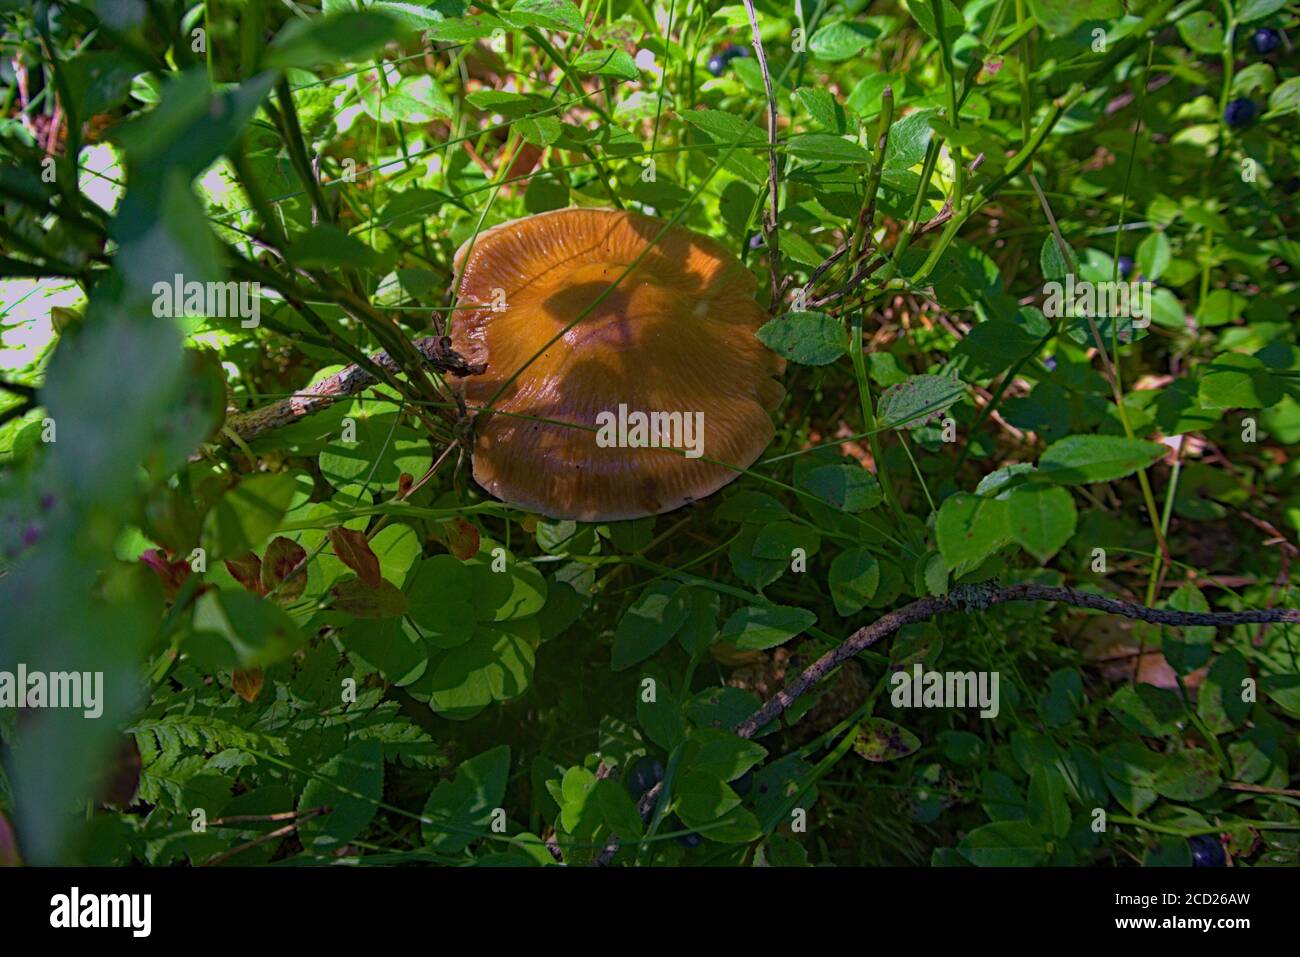 A poisonous brown capped mushroom growing naturally in a Polish forest Stock Photo